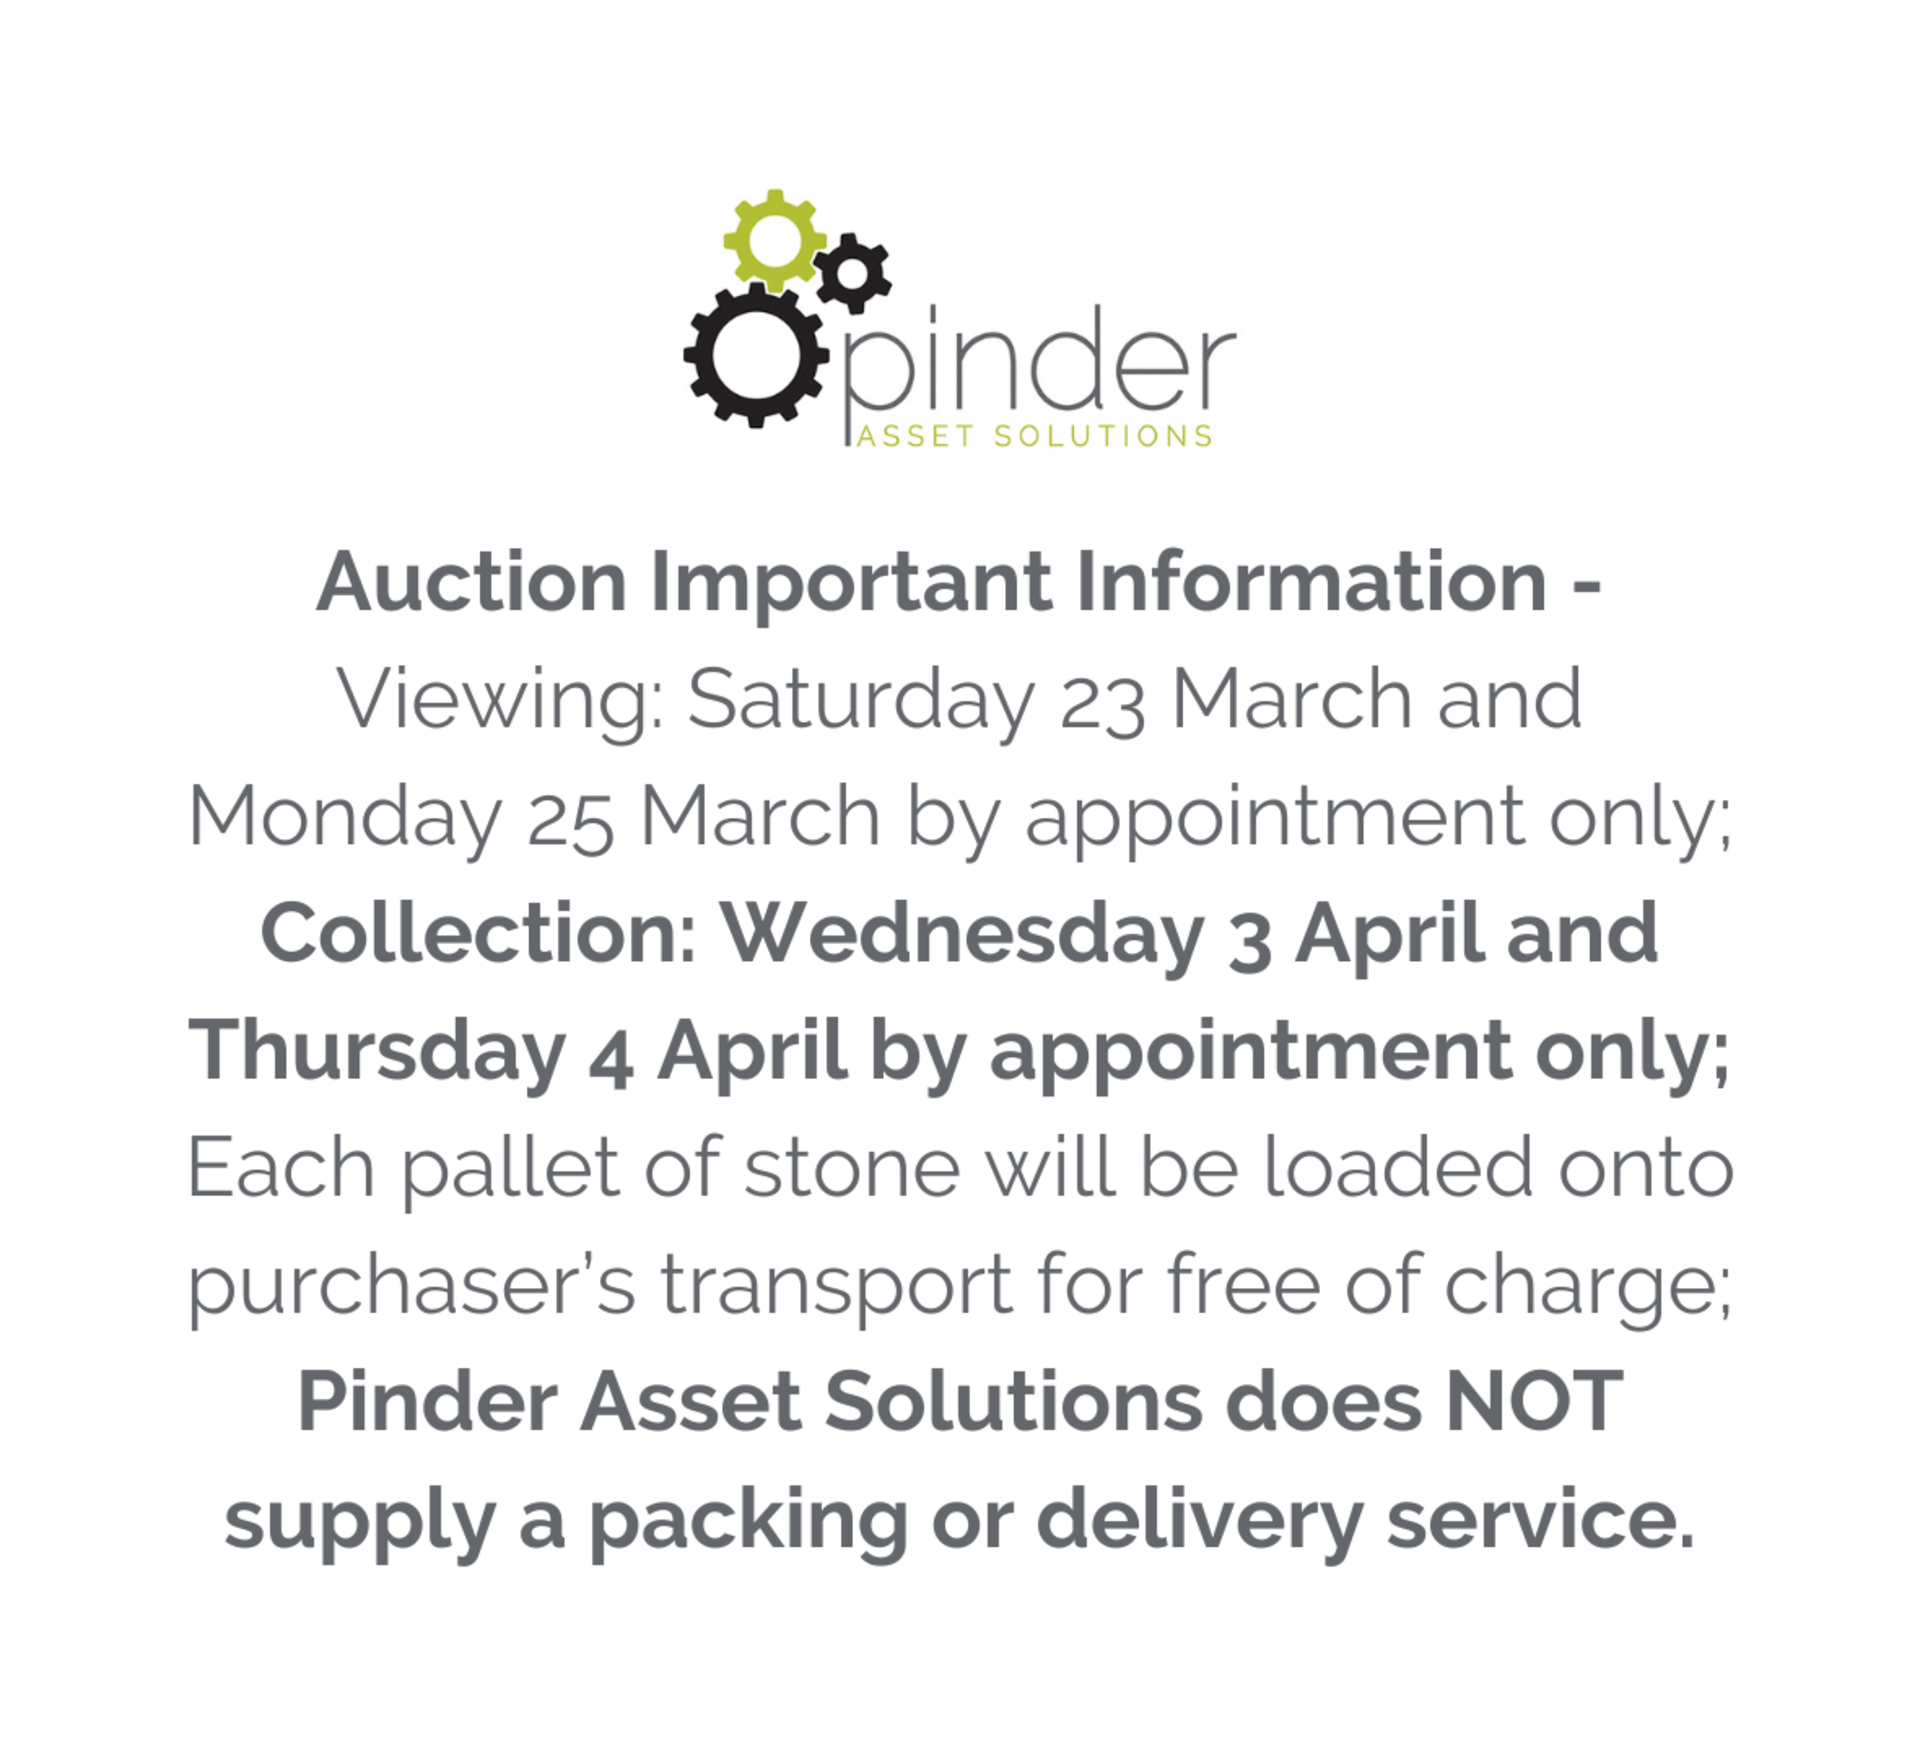 Auction Important Information - Viewing: Saturday 23 March and Monday 25 March by appointment